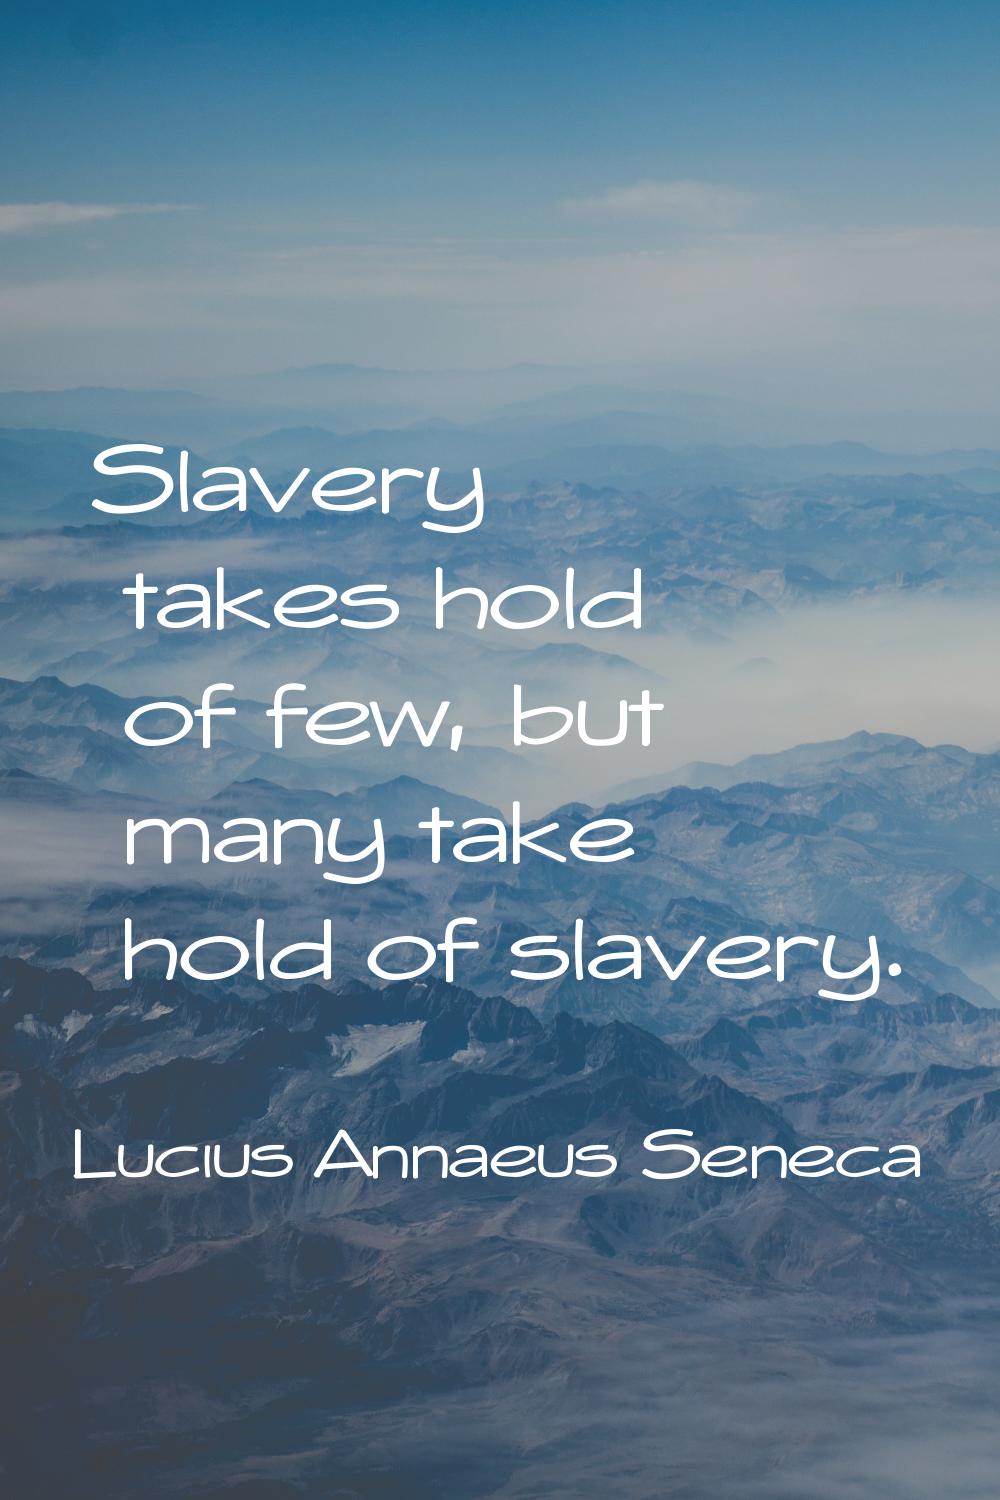 Slavery takes hold of few, but many take hold of slavery.